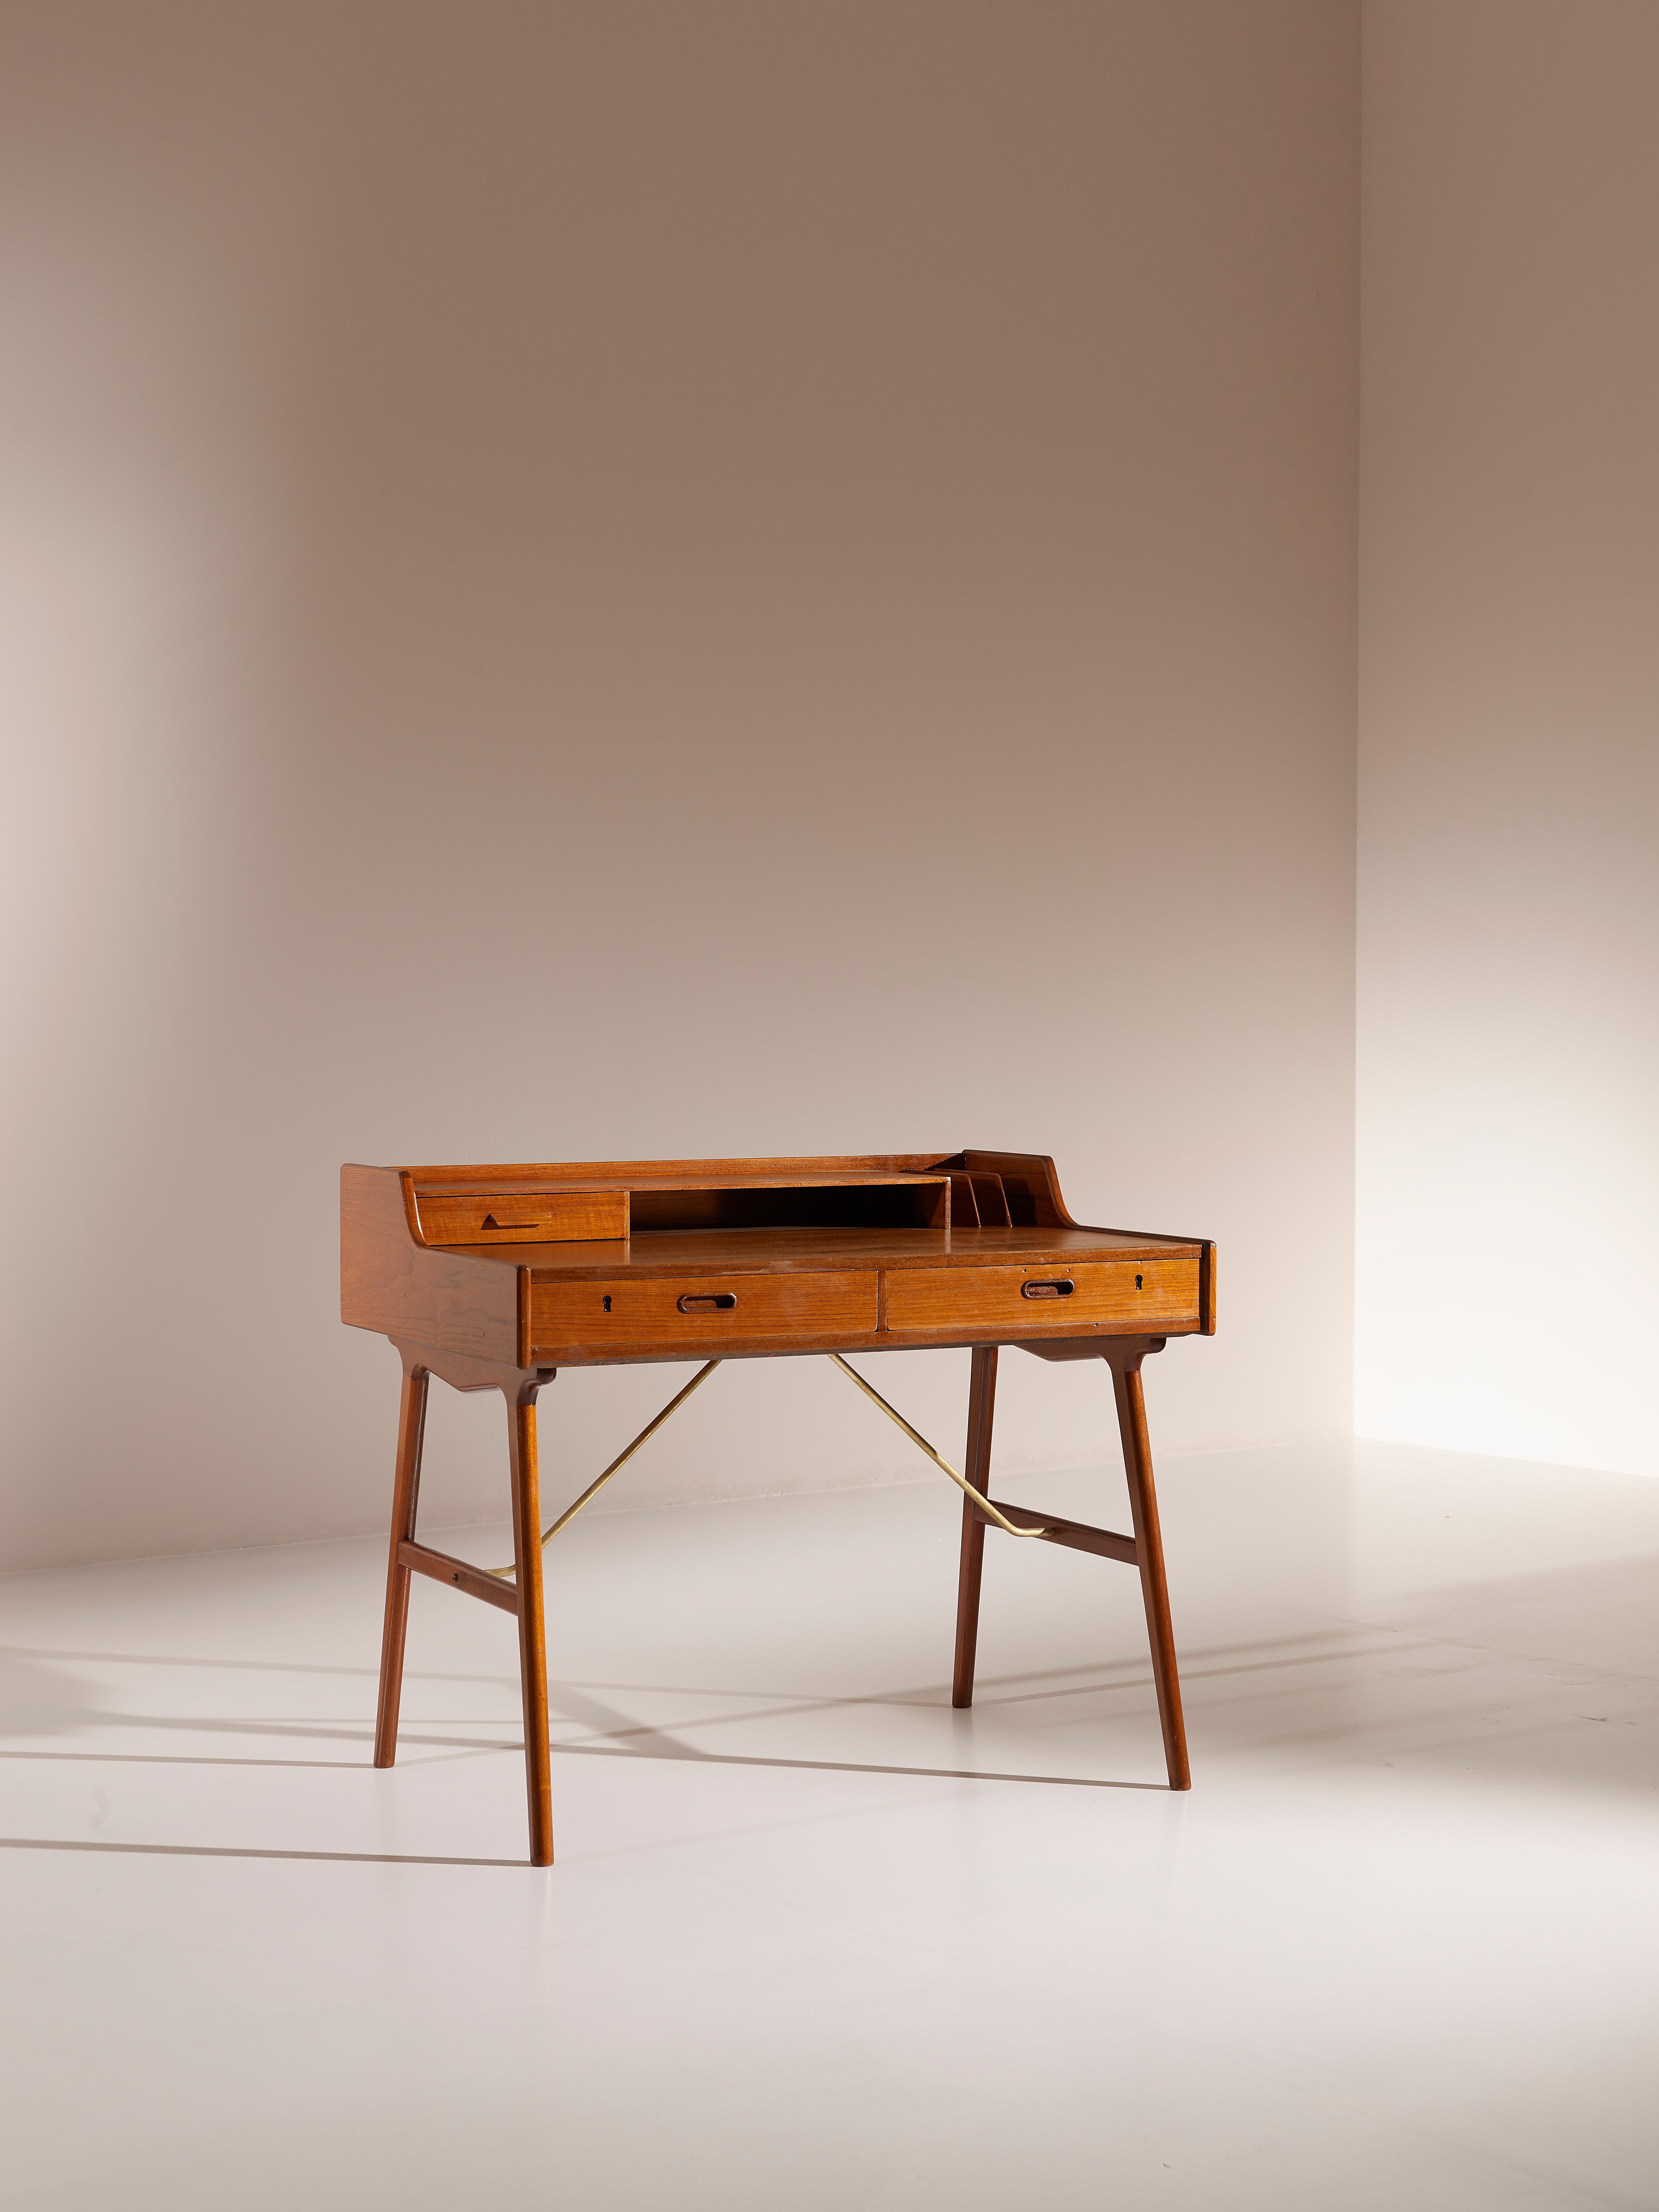 Mid century Danish writing desk model no. 56 designed by Arne Wahl Iversen for Vinde Møbelfabrik, Denmark. 

This two-tiered desk features splayed legs with supporting brass crossbars. It offers plenty of storage for organising personal belongings